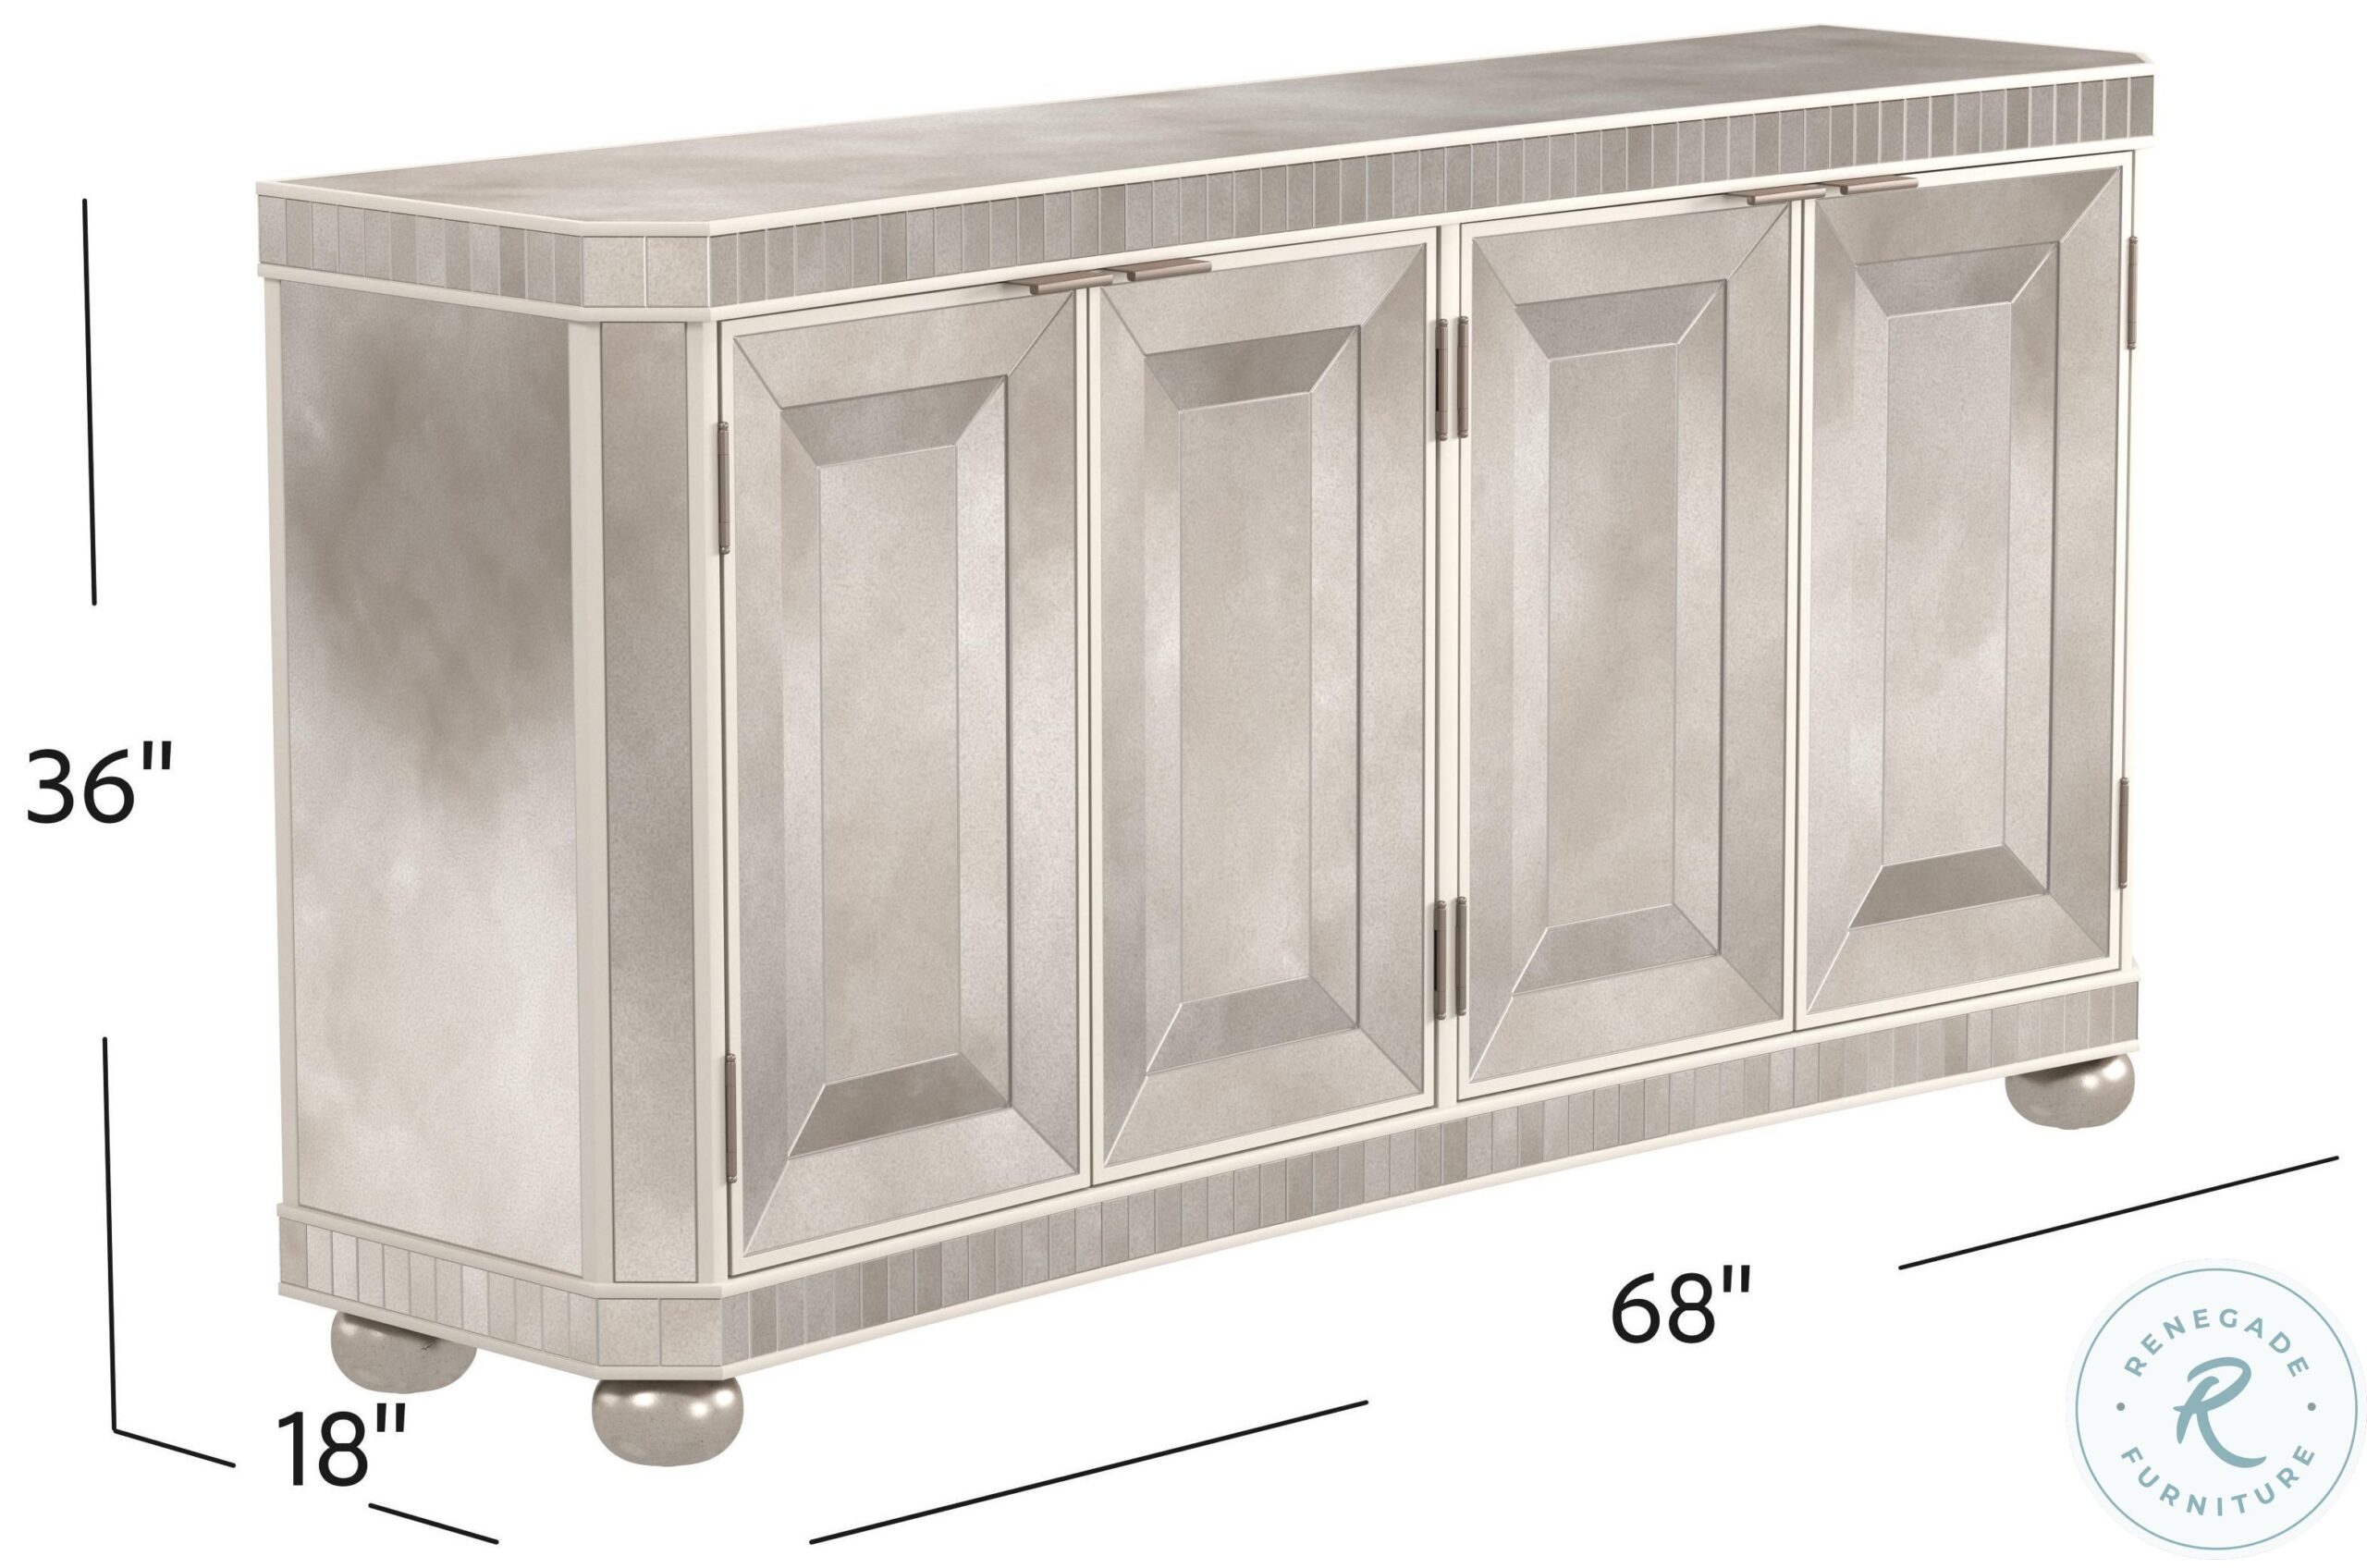 Moiselle Antique Mirror And Silverleaf 4 Door Server2 scaled